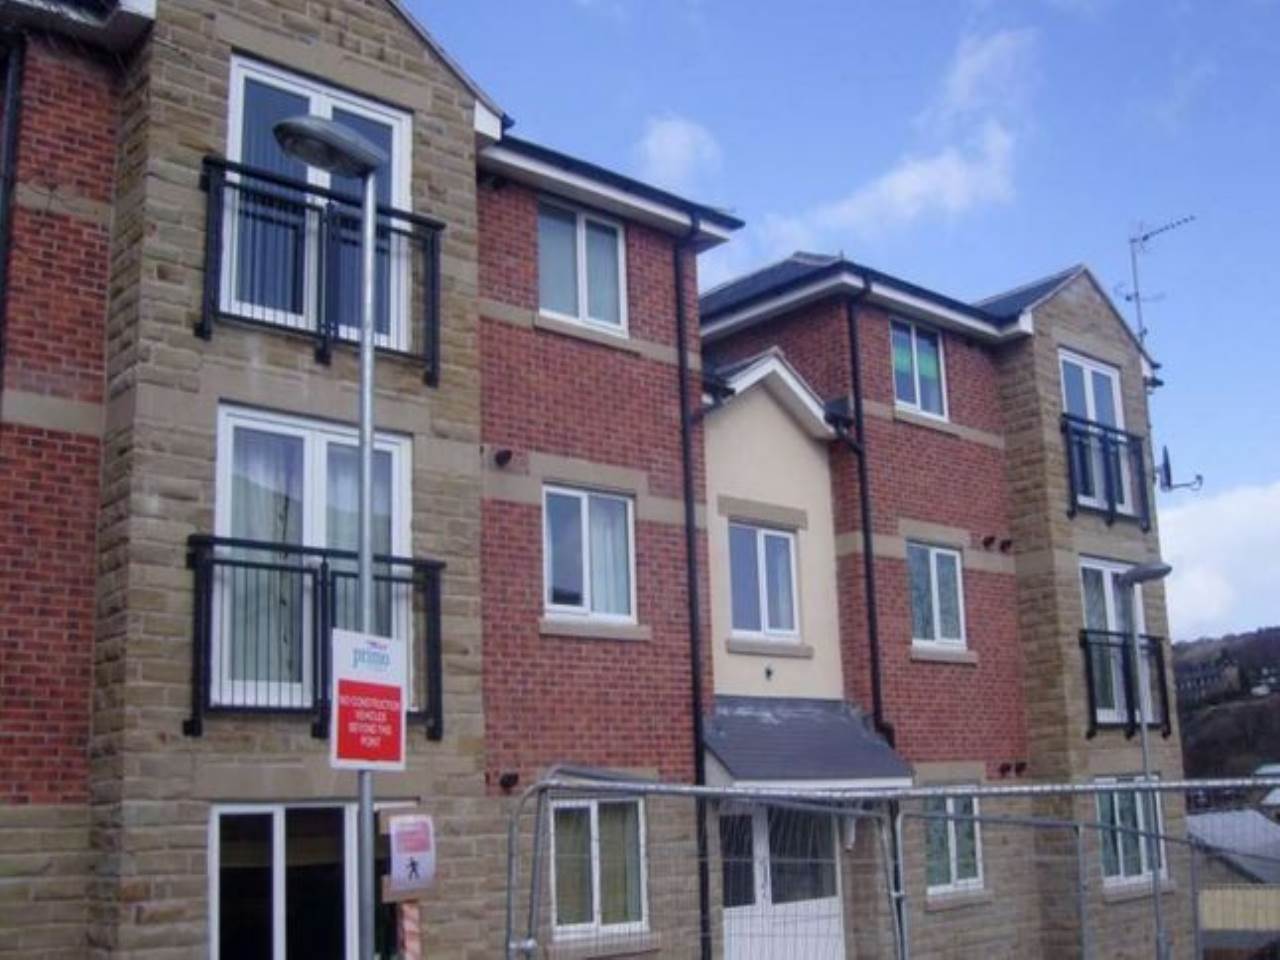 1 bed house to rent - Property Image 1